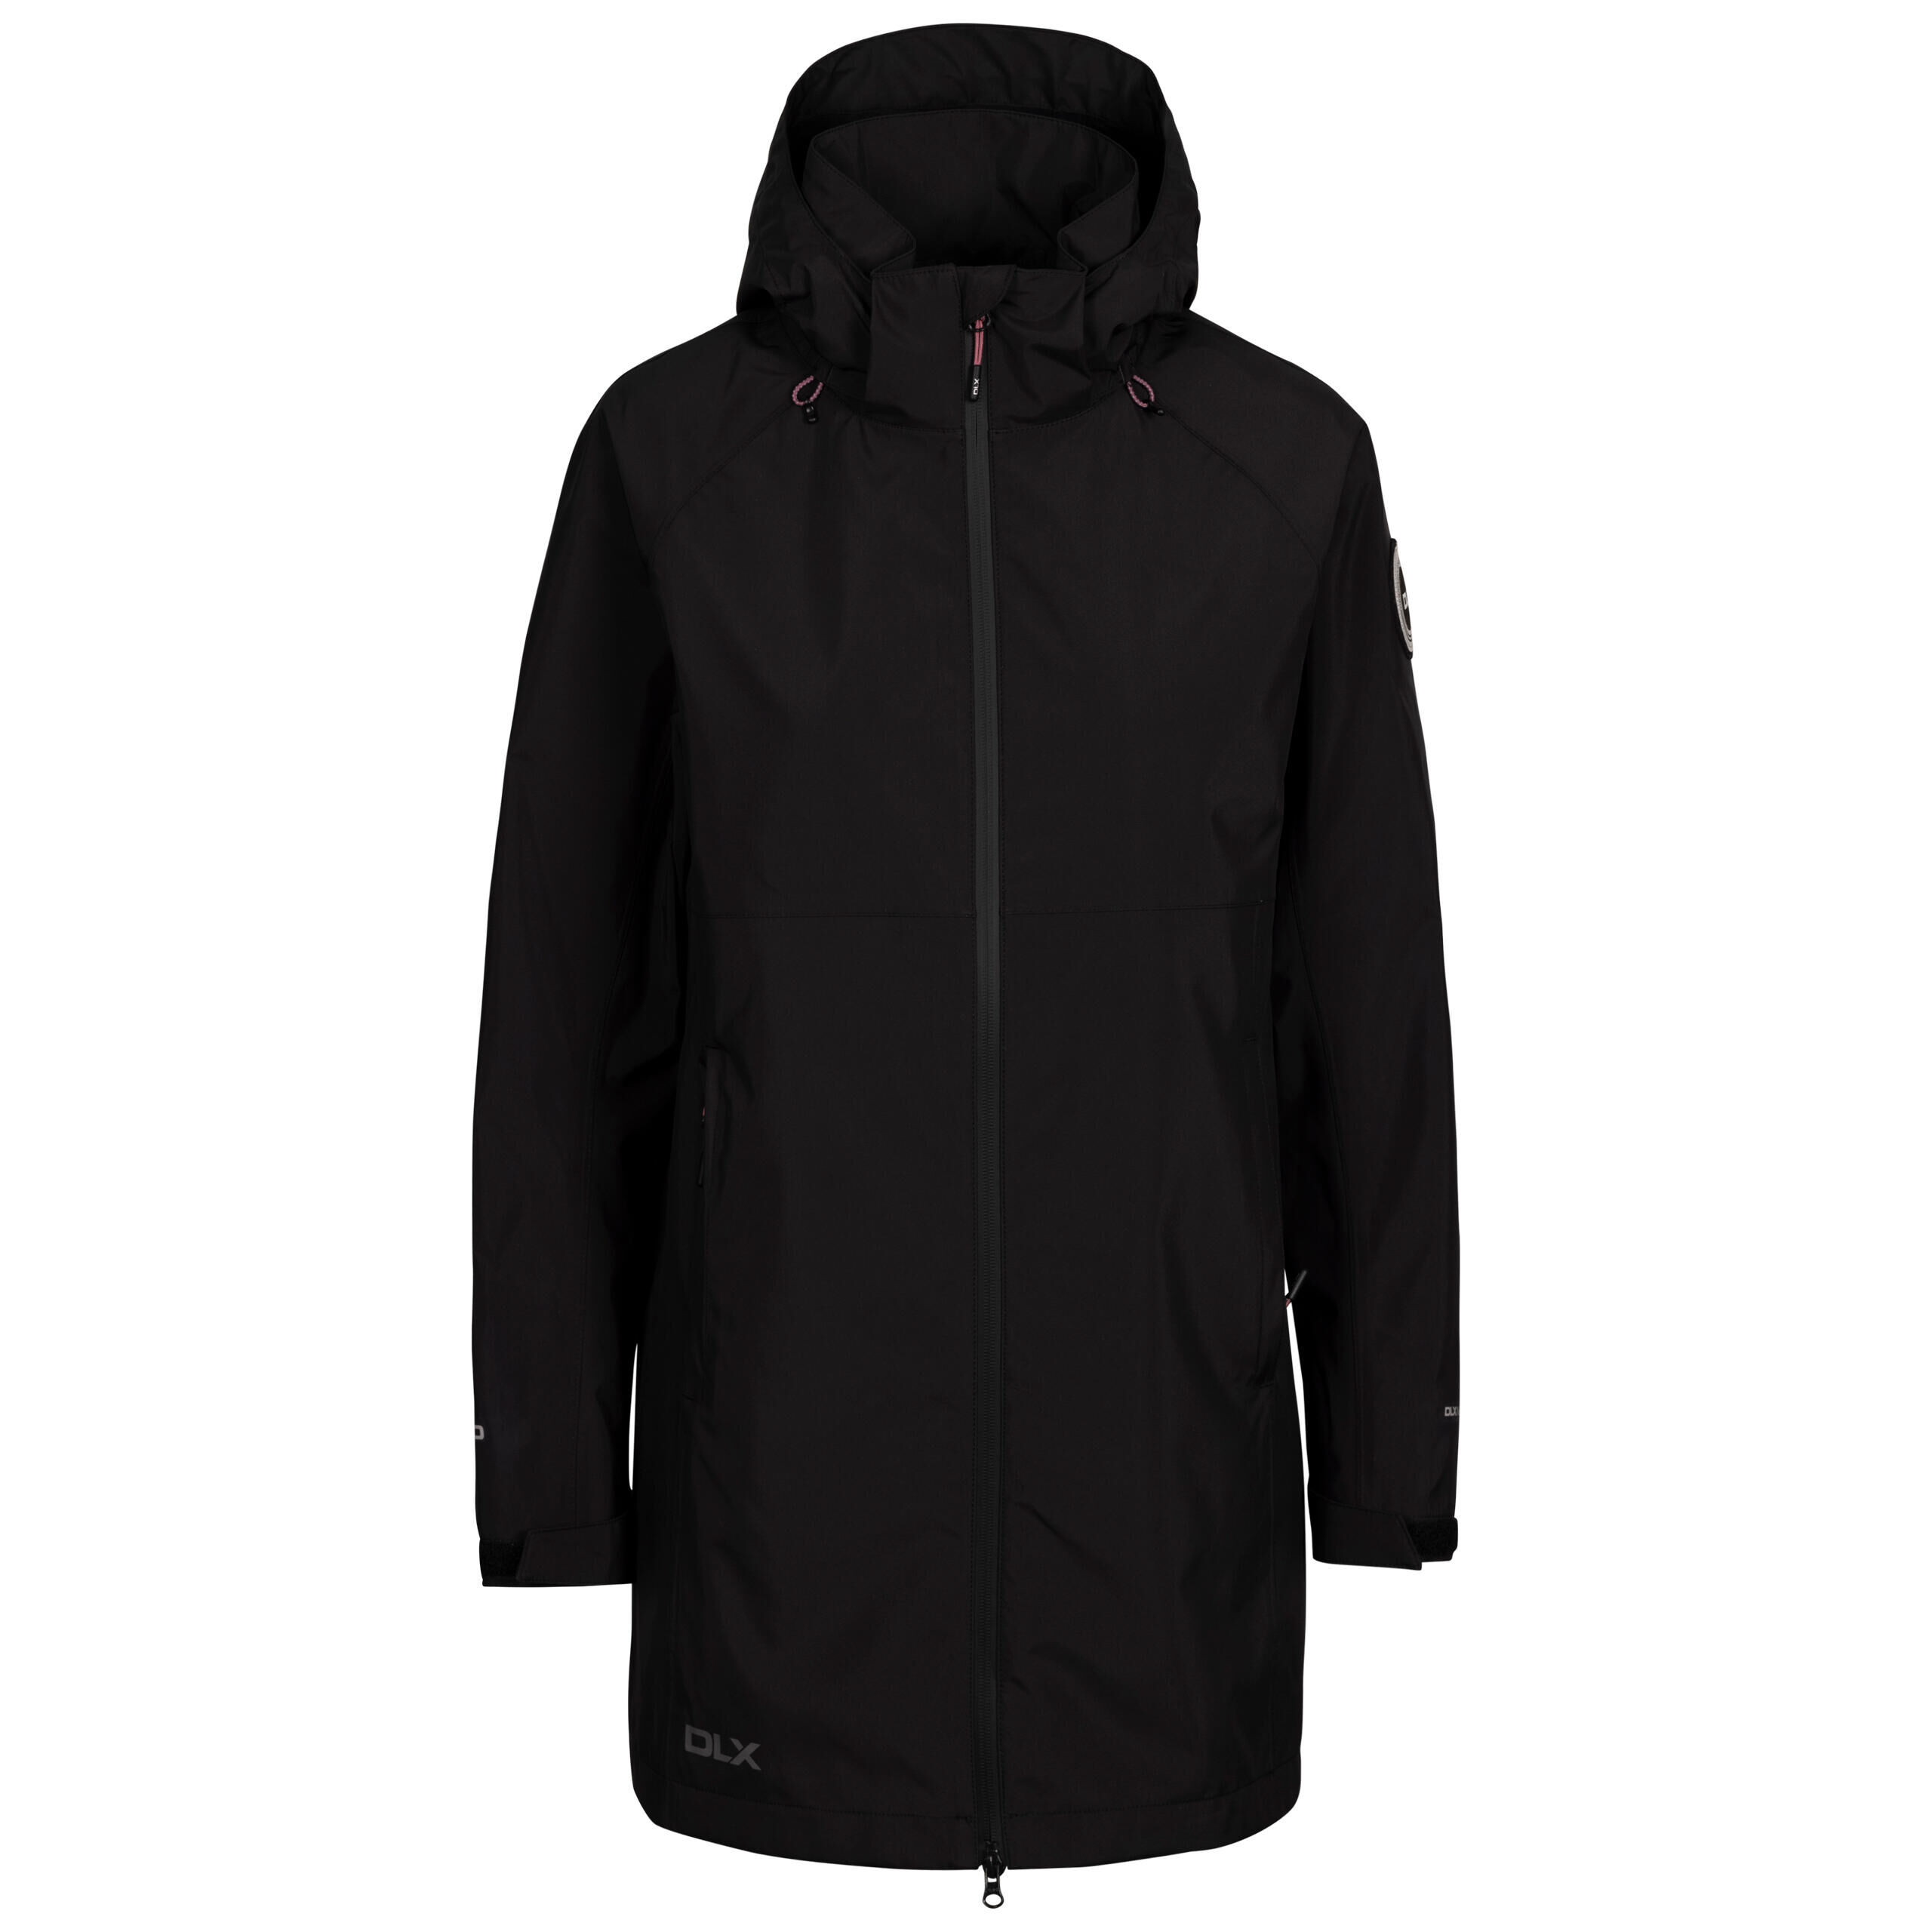 DLX Womens Waterproof Jacket Long Length With Zip Off Hood, Pockets Lucille